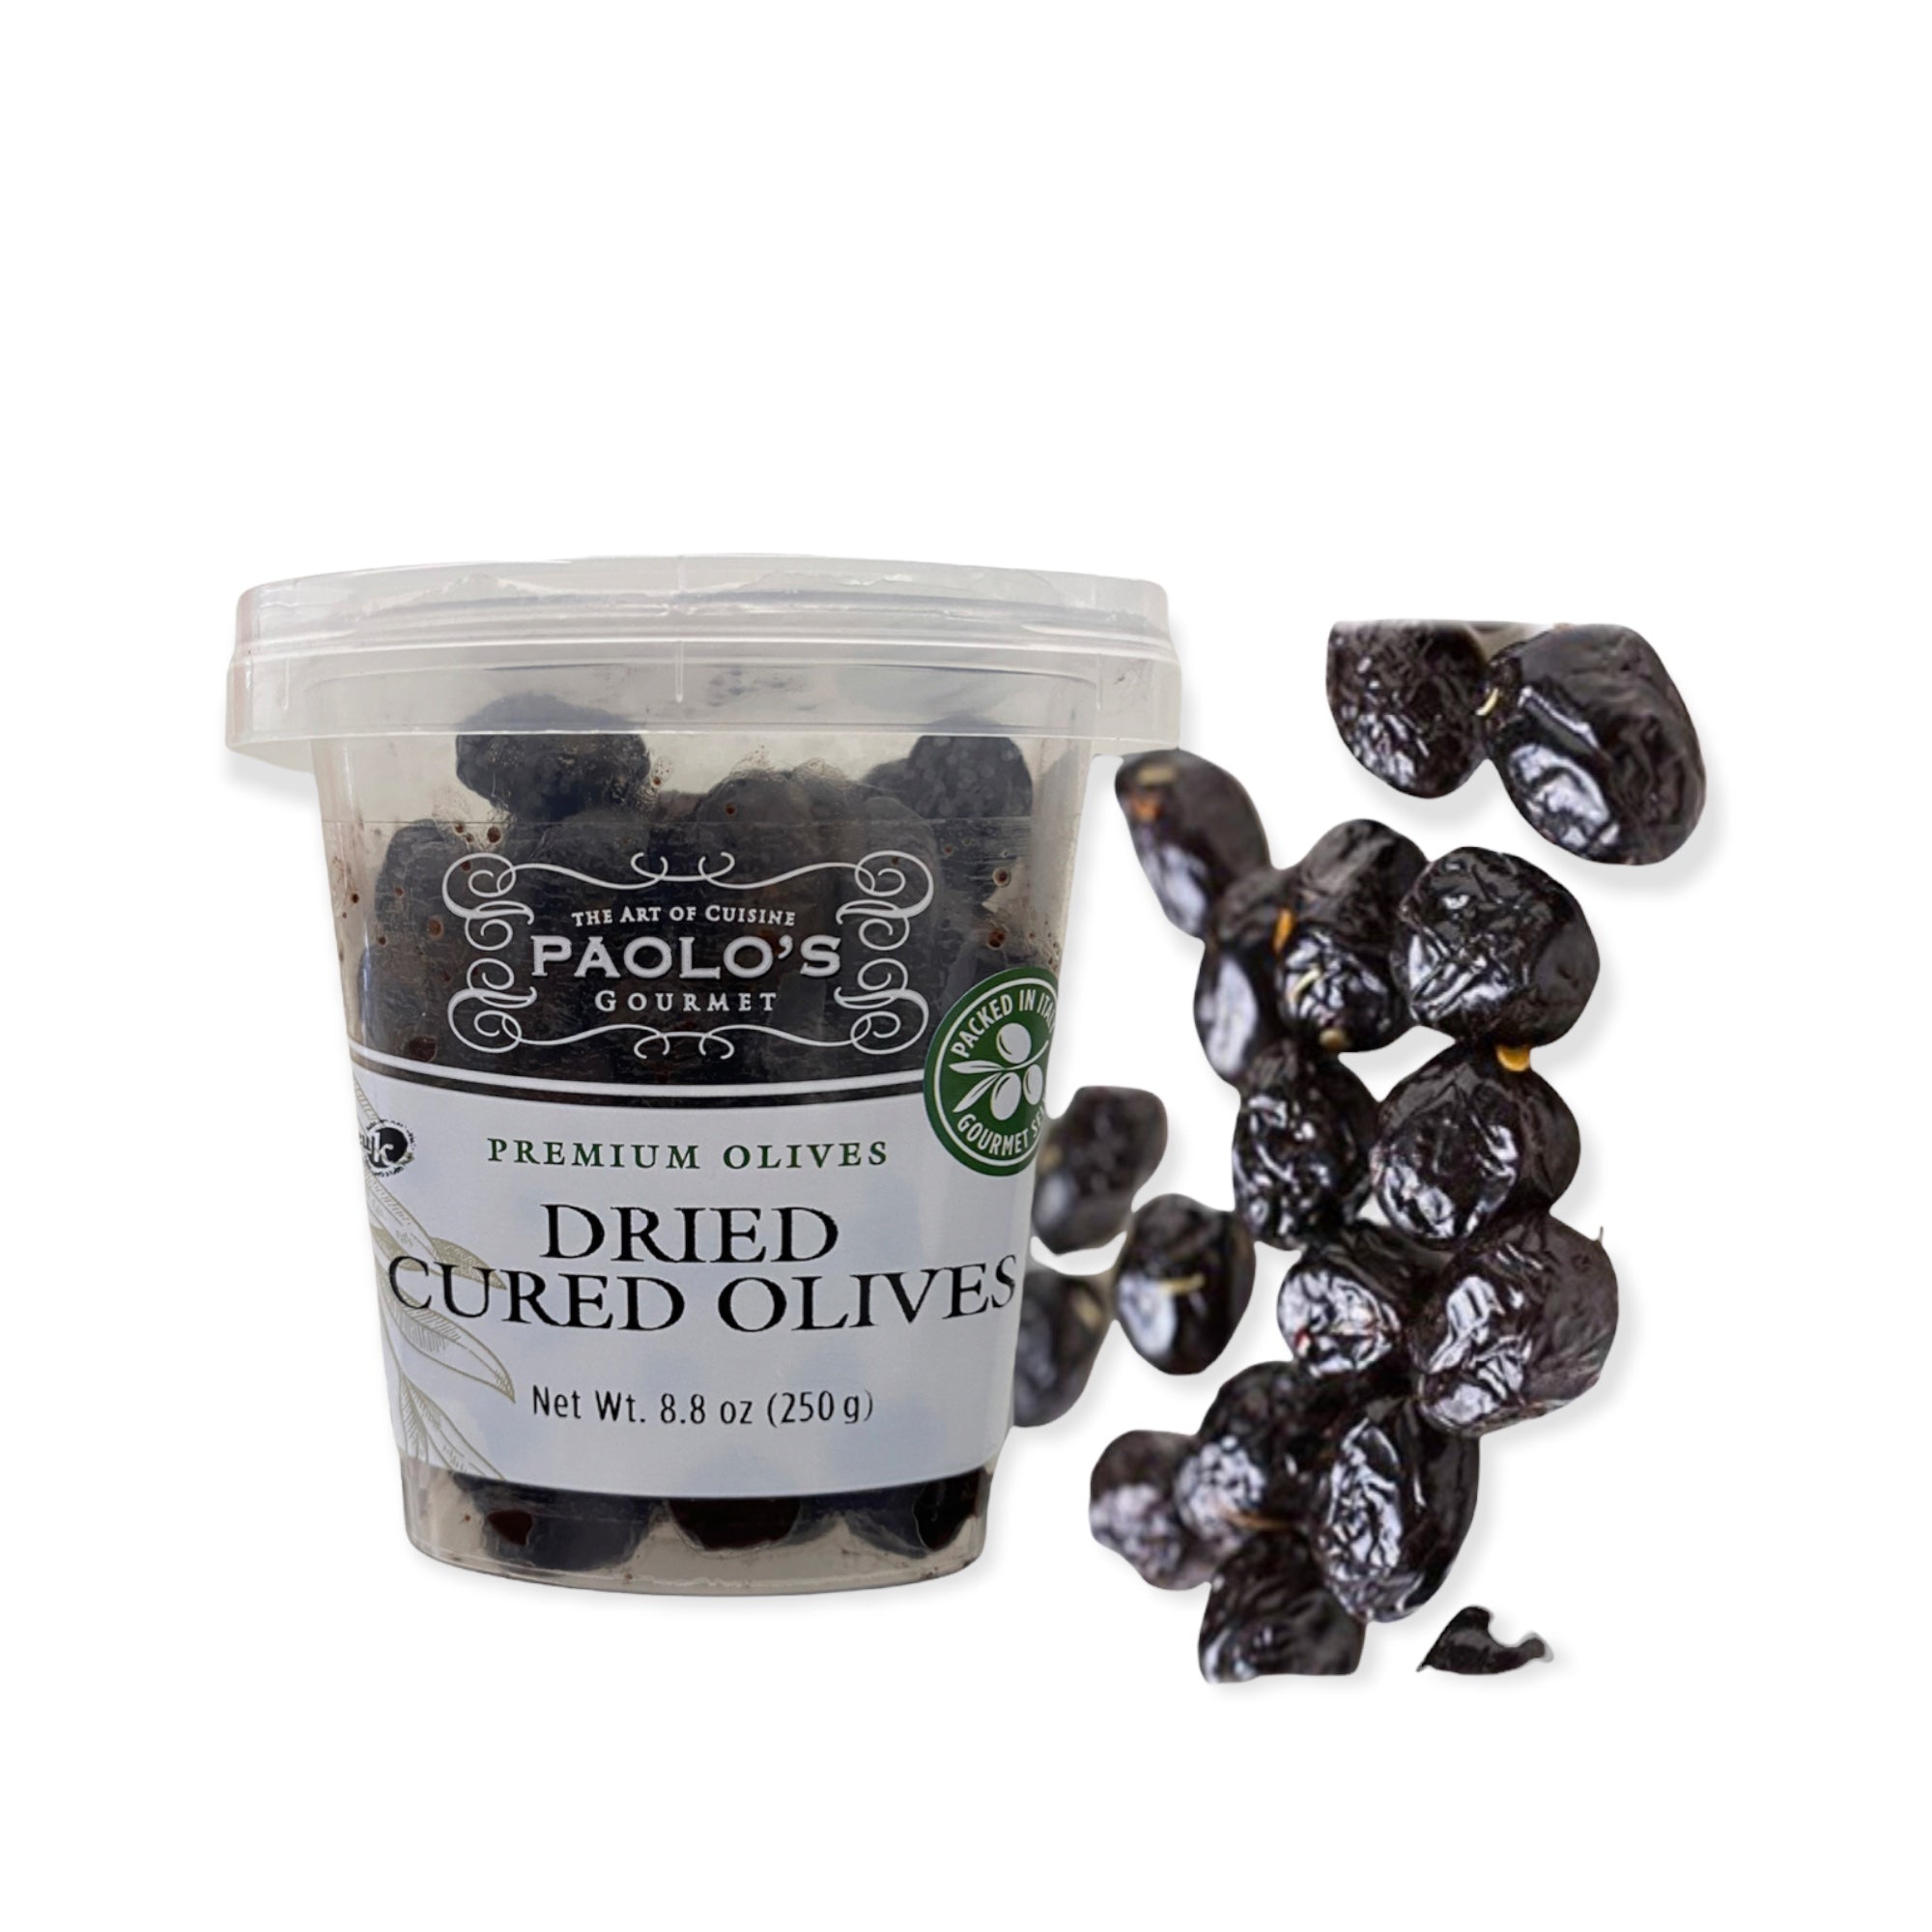 Dried Cured Olives Paolo’s 250g